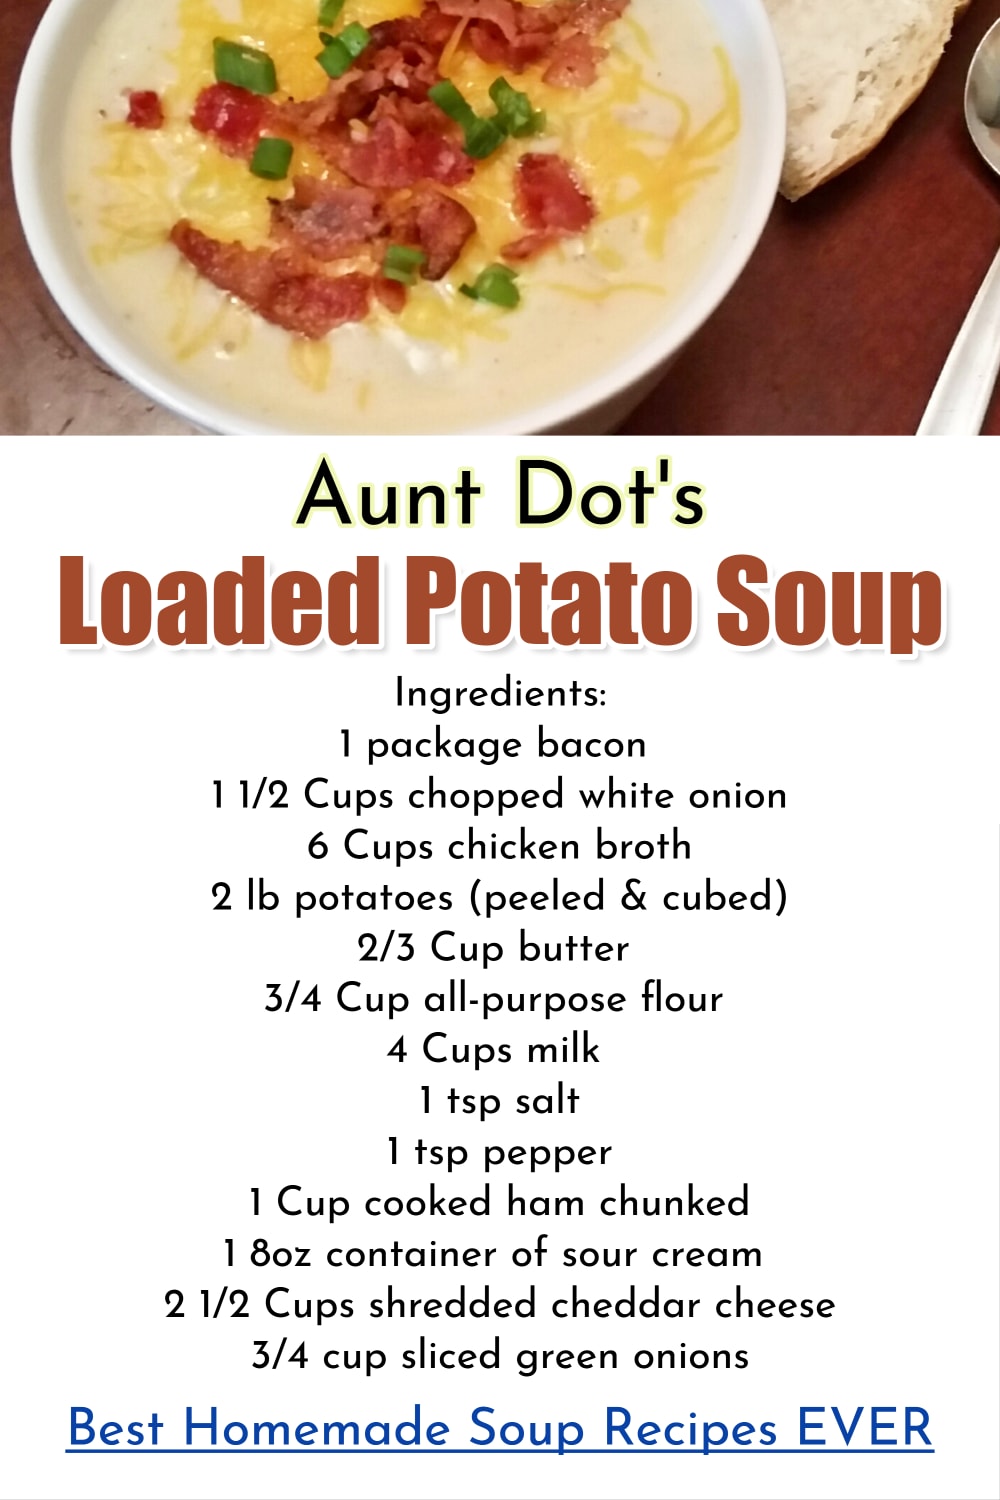 Homemade Soup Recipes - Loaded Potato Soup with bacon and cheese - Best Homemade soup recipes EVER!